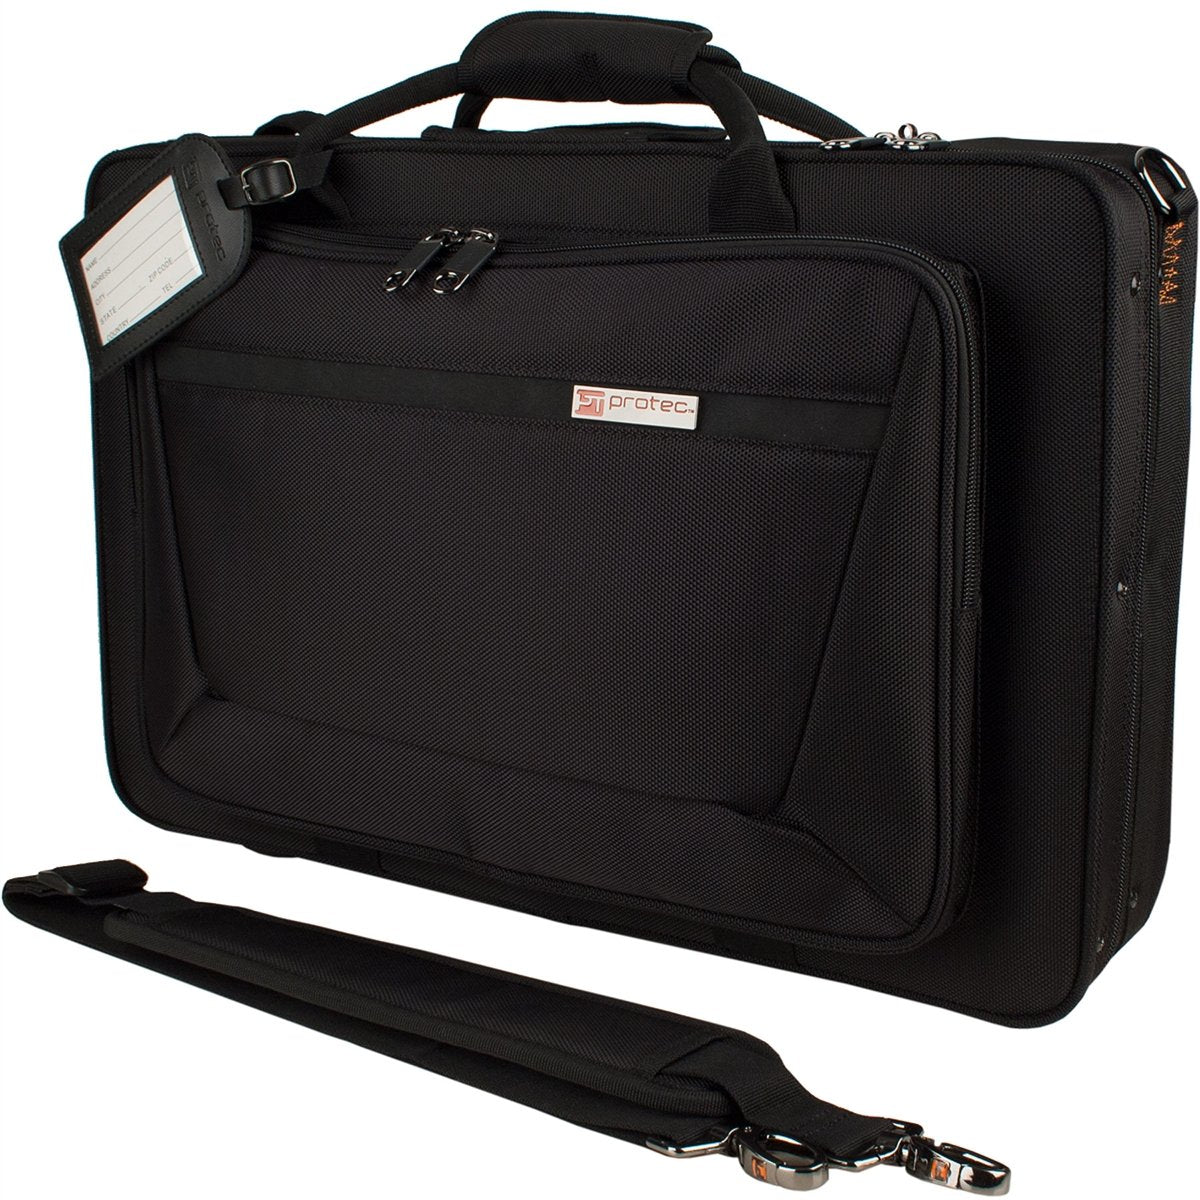 Protec - Oboe/English Horn Combi PRO PAC Case-Accessories-Protec-Music Elements